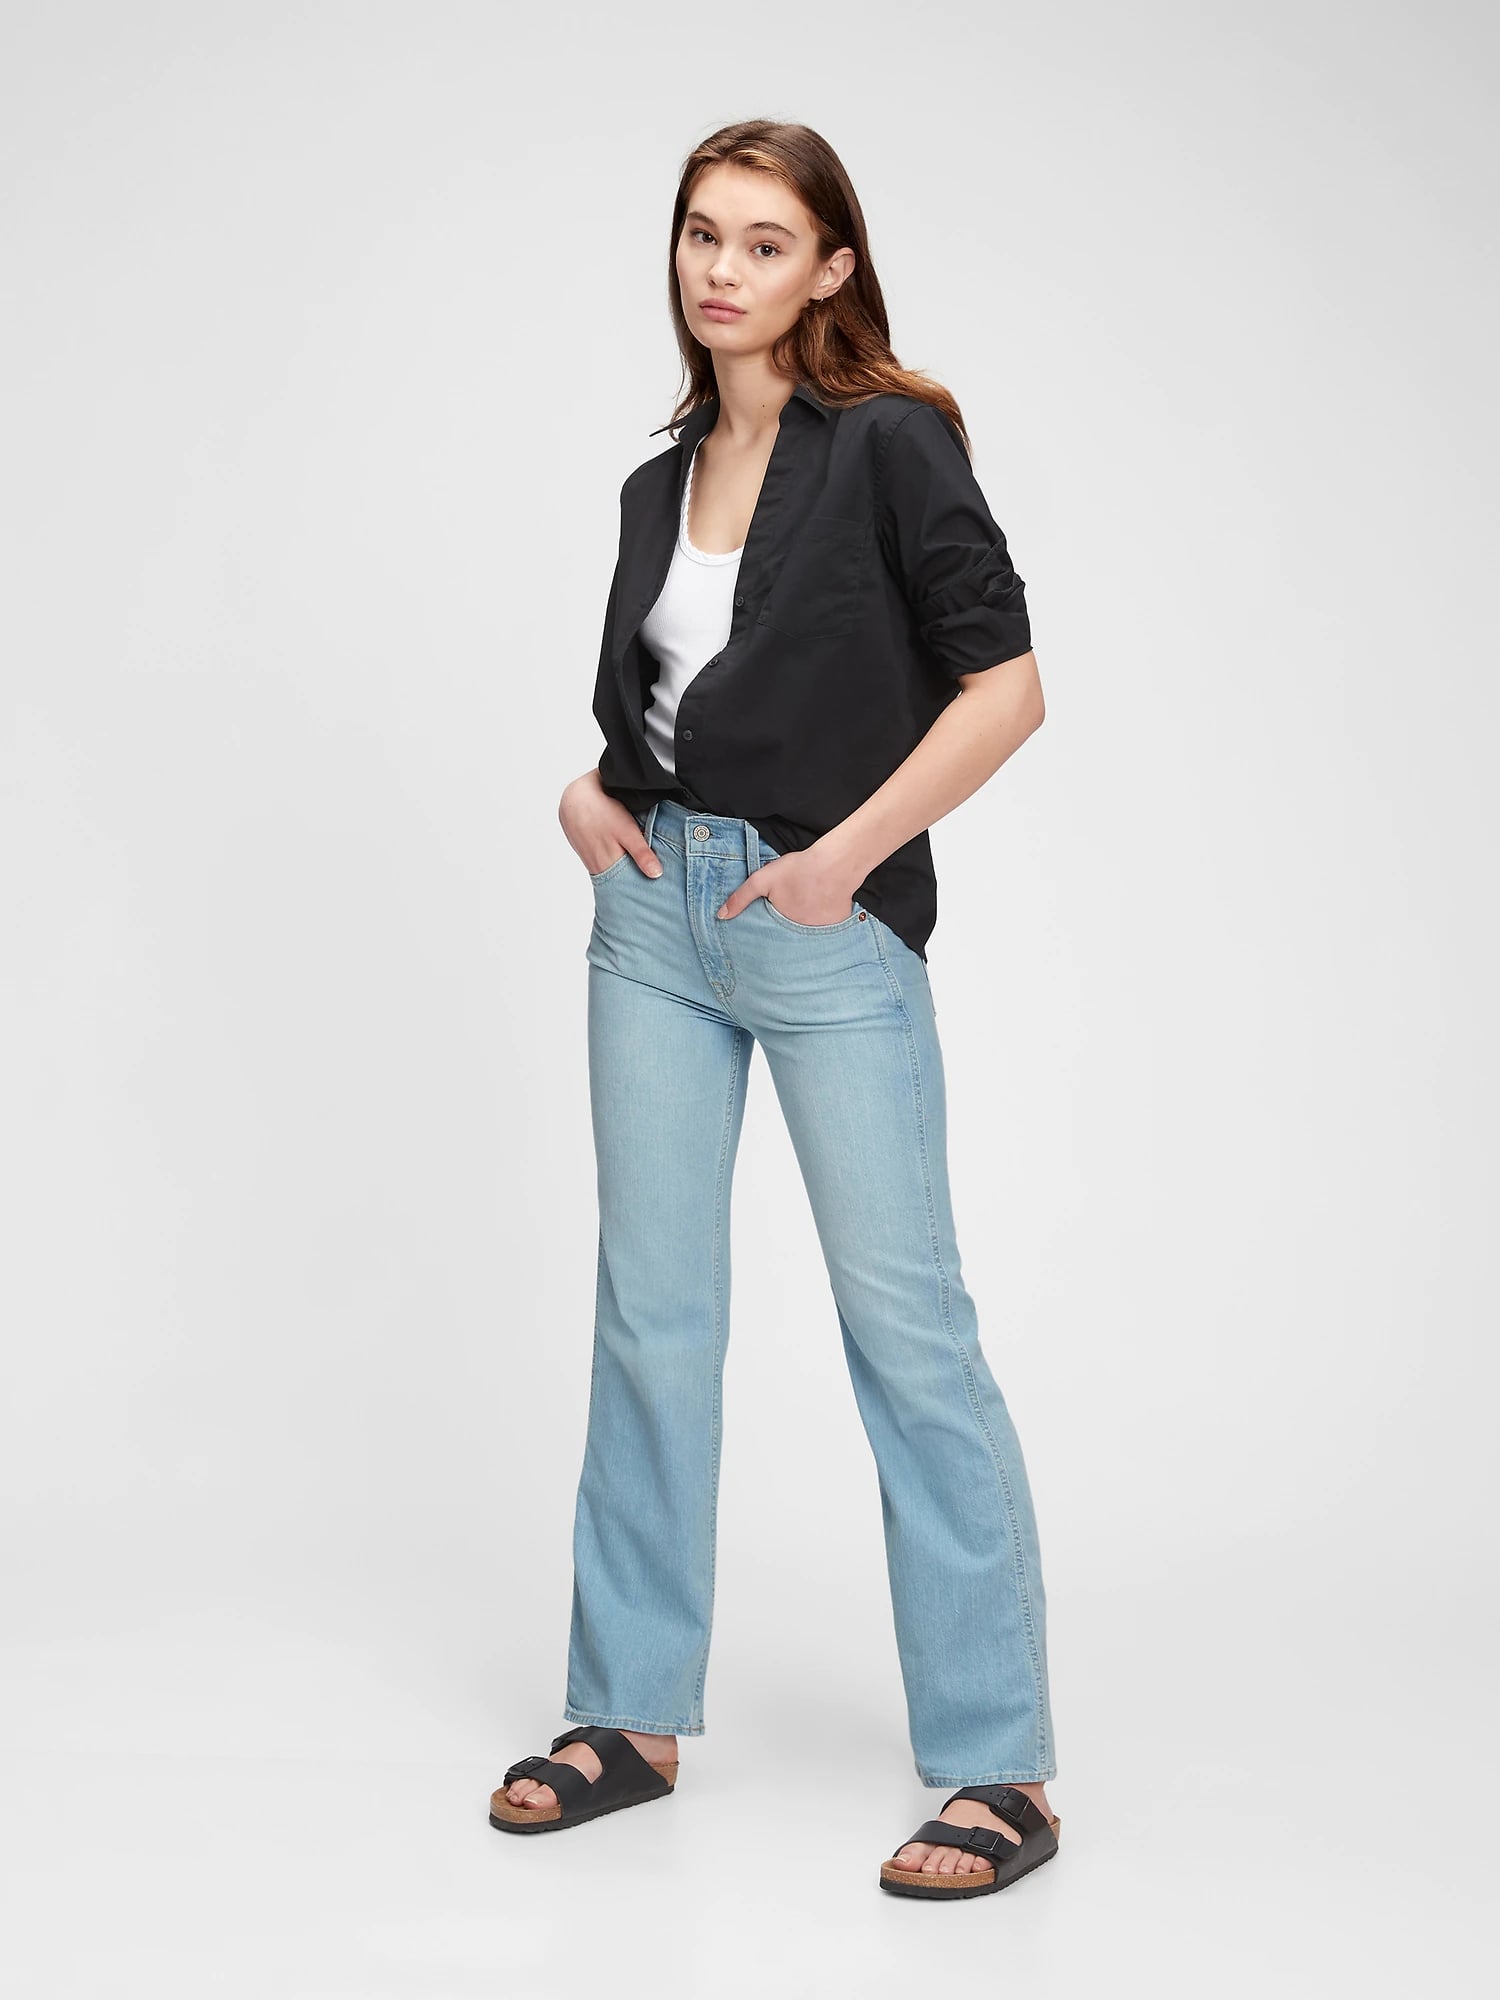 A Light-Wash Jean: Gap High Rise Vintage Flare Jeans, Yes, Flare Jeans Are  Back, but This Time, They've Got an Edge